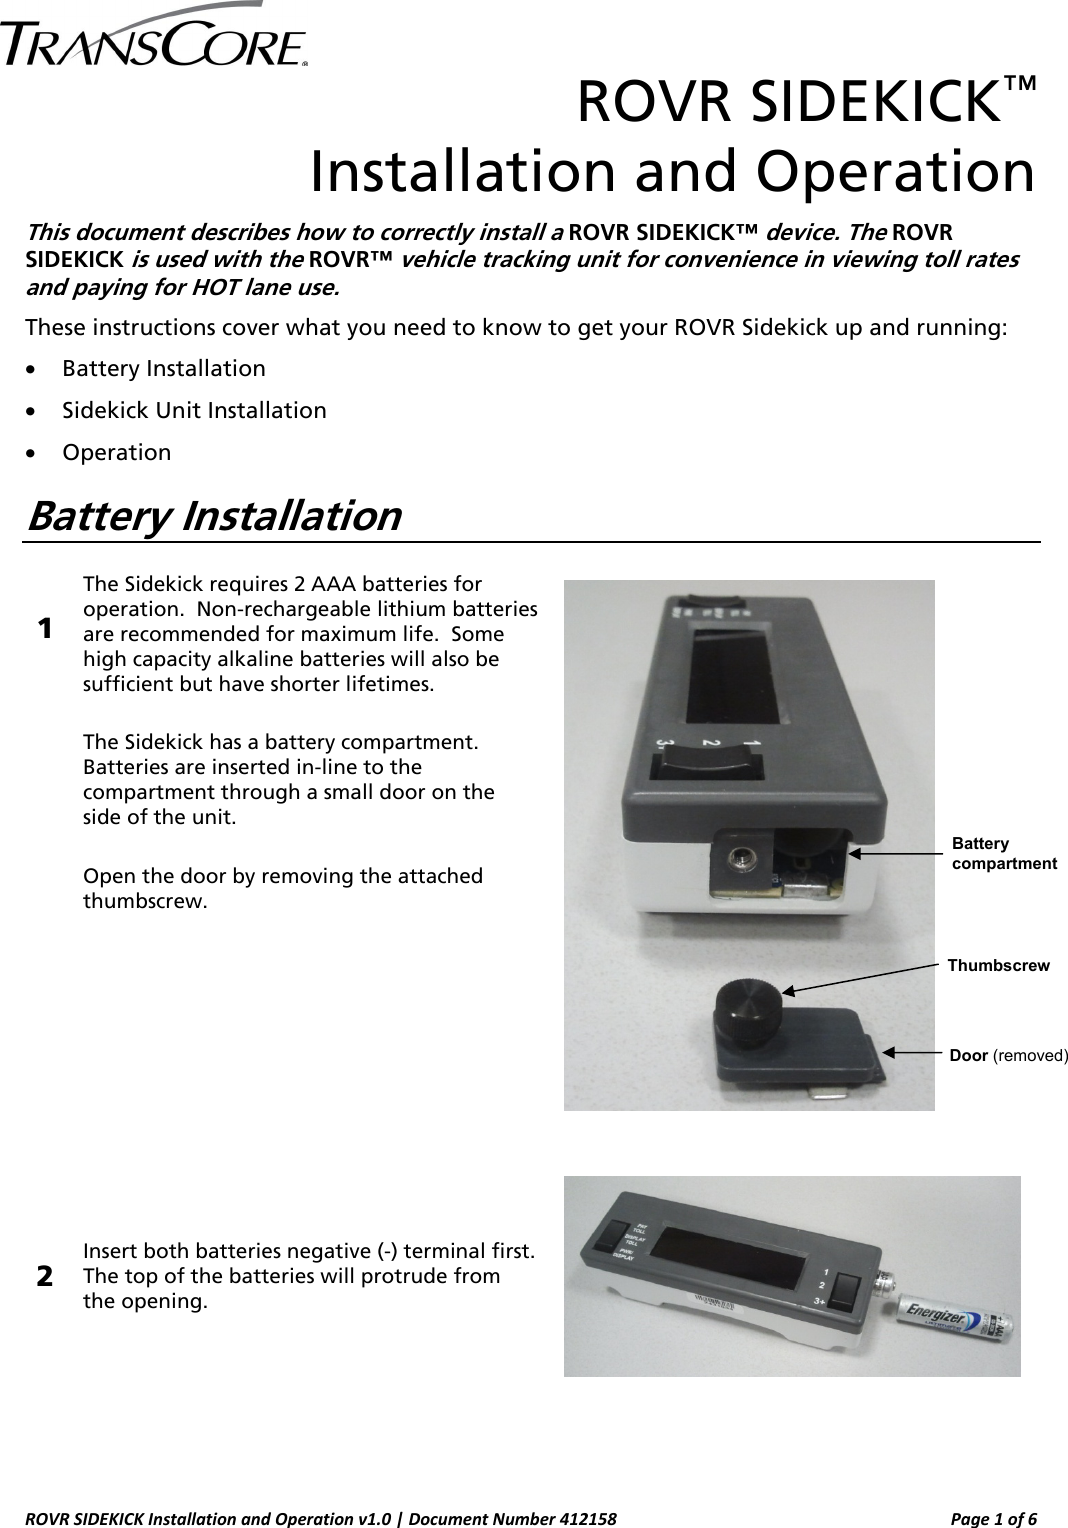  ROVR SIDEKICK Installation and Operation v1.0 | Document Number 412158  Page 1 of 6 ROVR SIDEKICK™  Installation and Operation  This document describes how to correctly install a ROVR SIDEKICK™ device. The ROVR SIDEKICK is used with the ROVR™ vehicle tracking unit for convenience in viewing toll rates and paying for HOT lane use. These instructions cover what you need to know to get your ROVR Sidekick up and running: • Battery Installation • Sidekick Unit Installation • Operation Battery Installation  1 The Sidekick requires 2 AAA batteries for operation.  Non-rechargeable lithium batteries are recommended for maximum life.  Some high capacity alkaline batteries will also be sufficient but have shorter lifetimes.  The Sidekick has a battery compartment. Batteries are inserted in-line to the compartment through a small door on the side of the unit.    Open the door by removing the attached thumbscrew.   2 Insert both batteries negative (-) terminal first.  The top of the batteries will protrude from the opening.        ThumbscrewDoor (removed) Battery compartment 